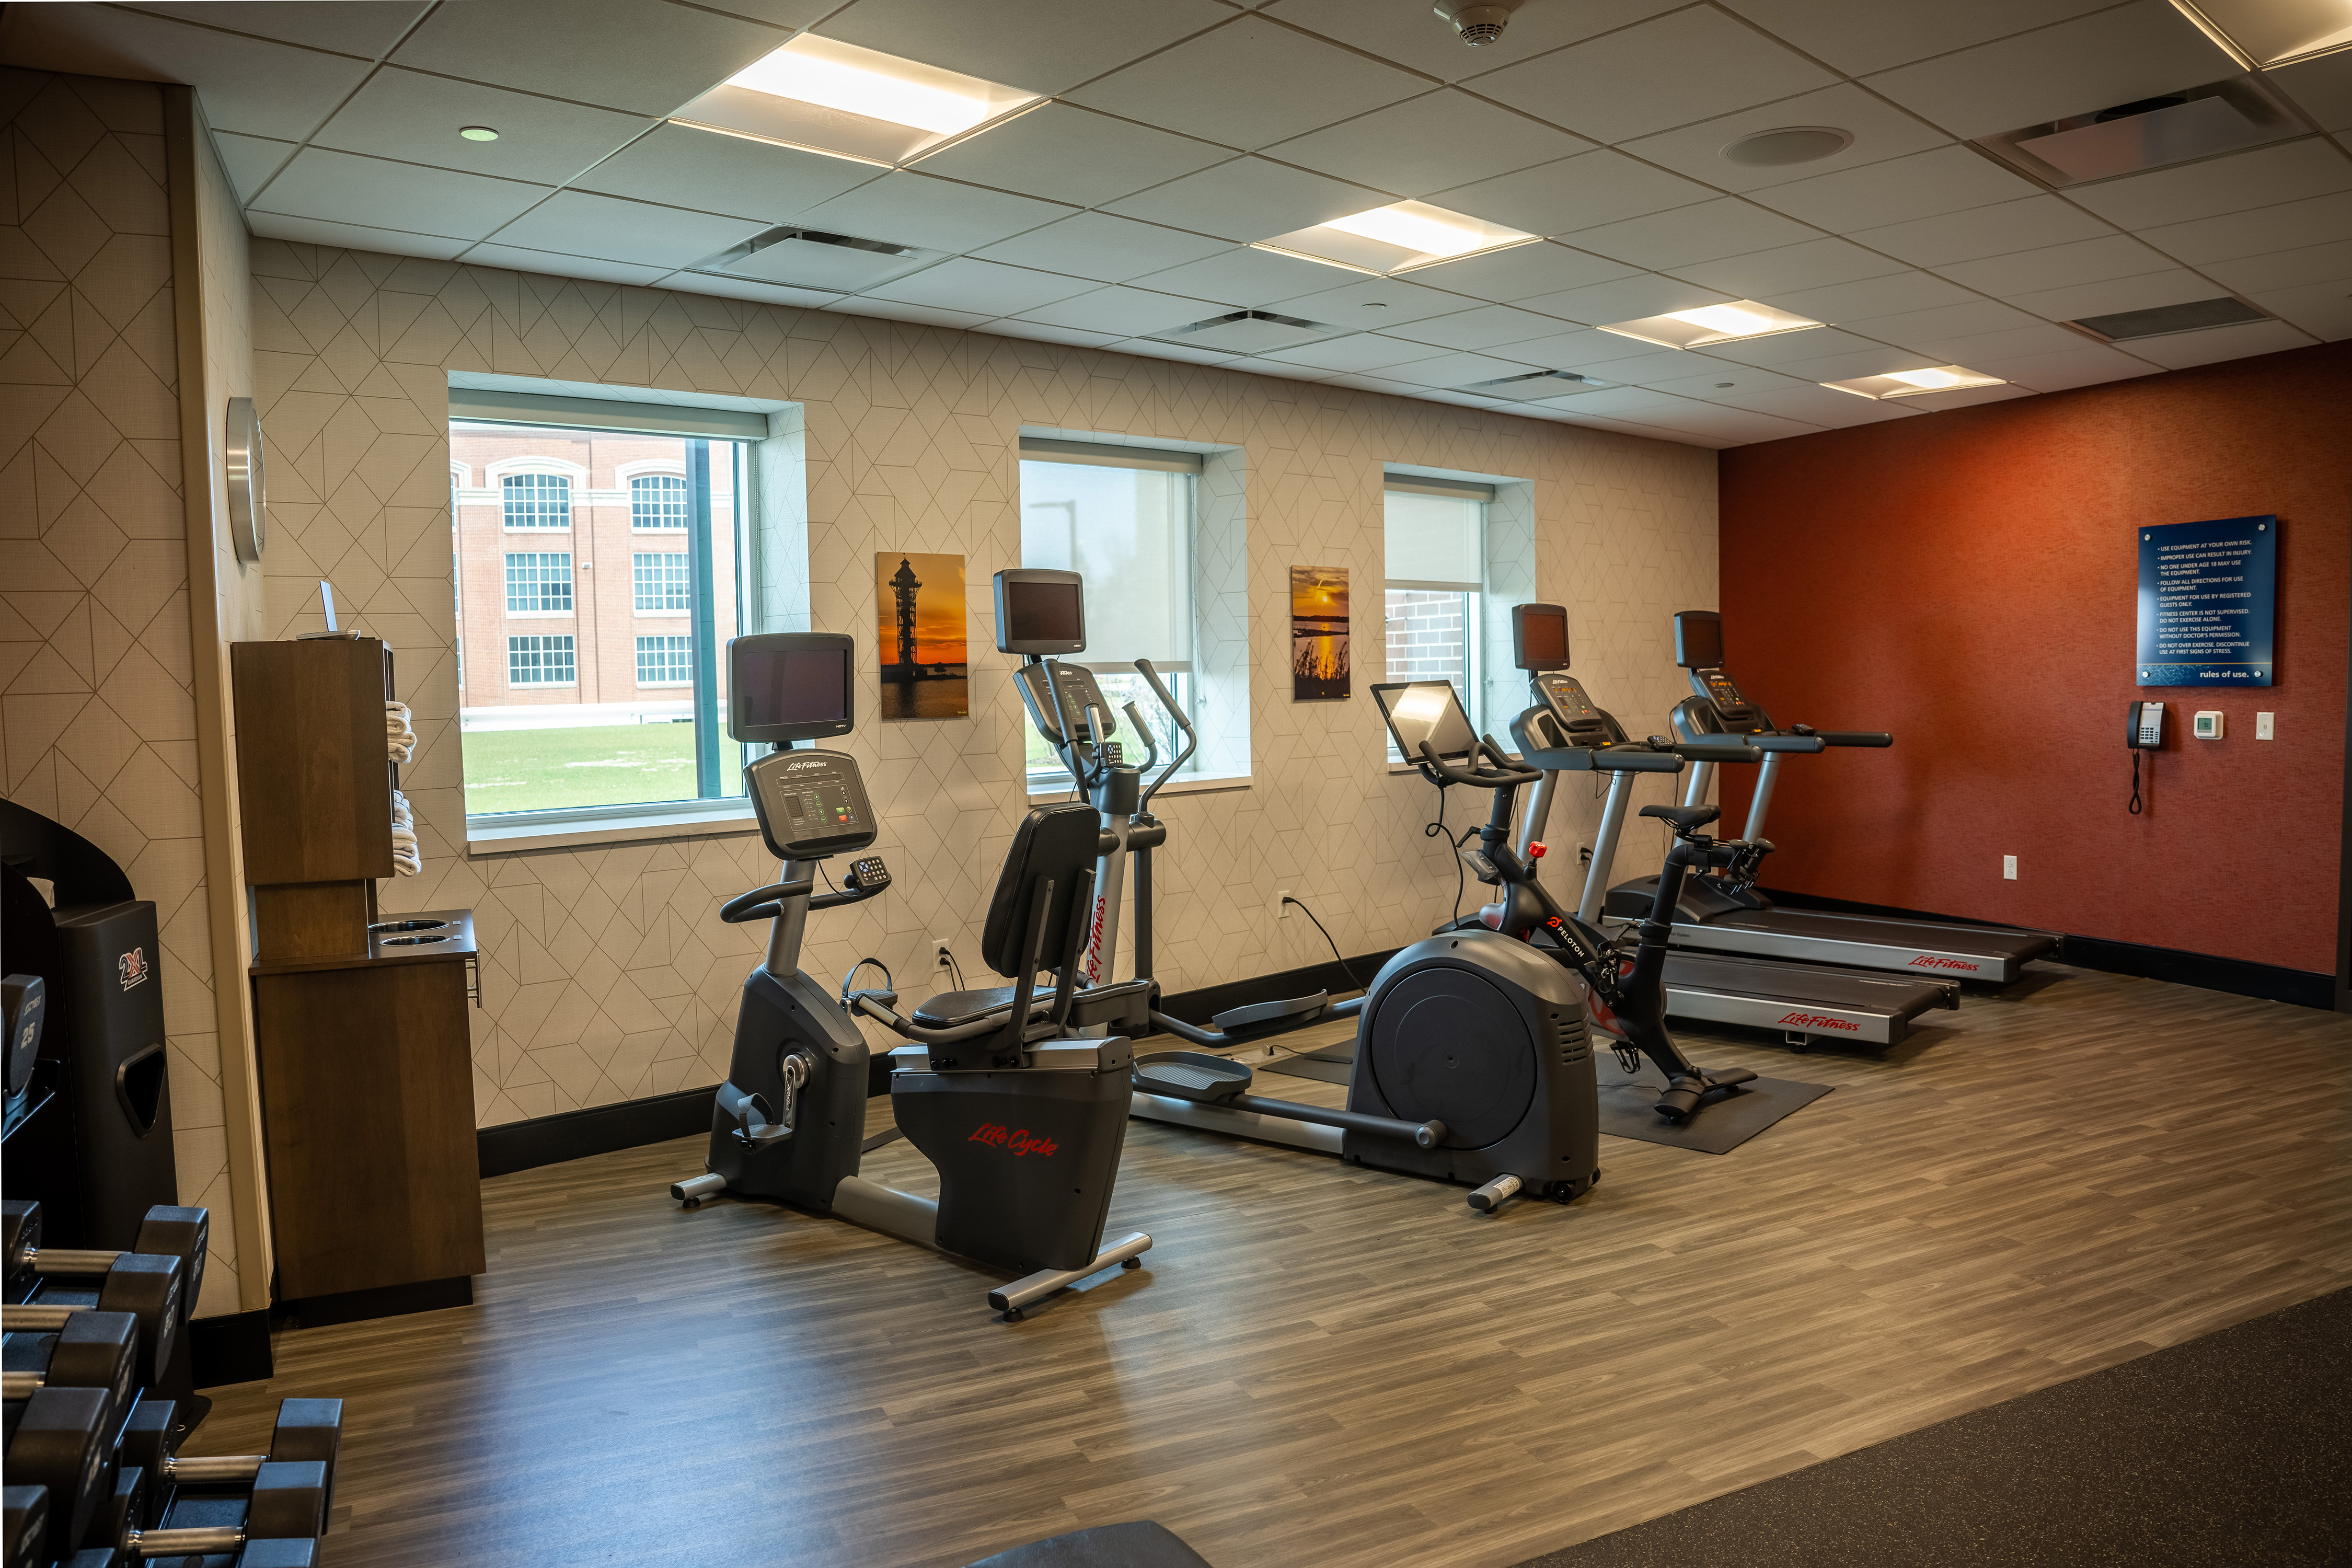 Treadmills and Recumbent Bikes in a Fitness Room